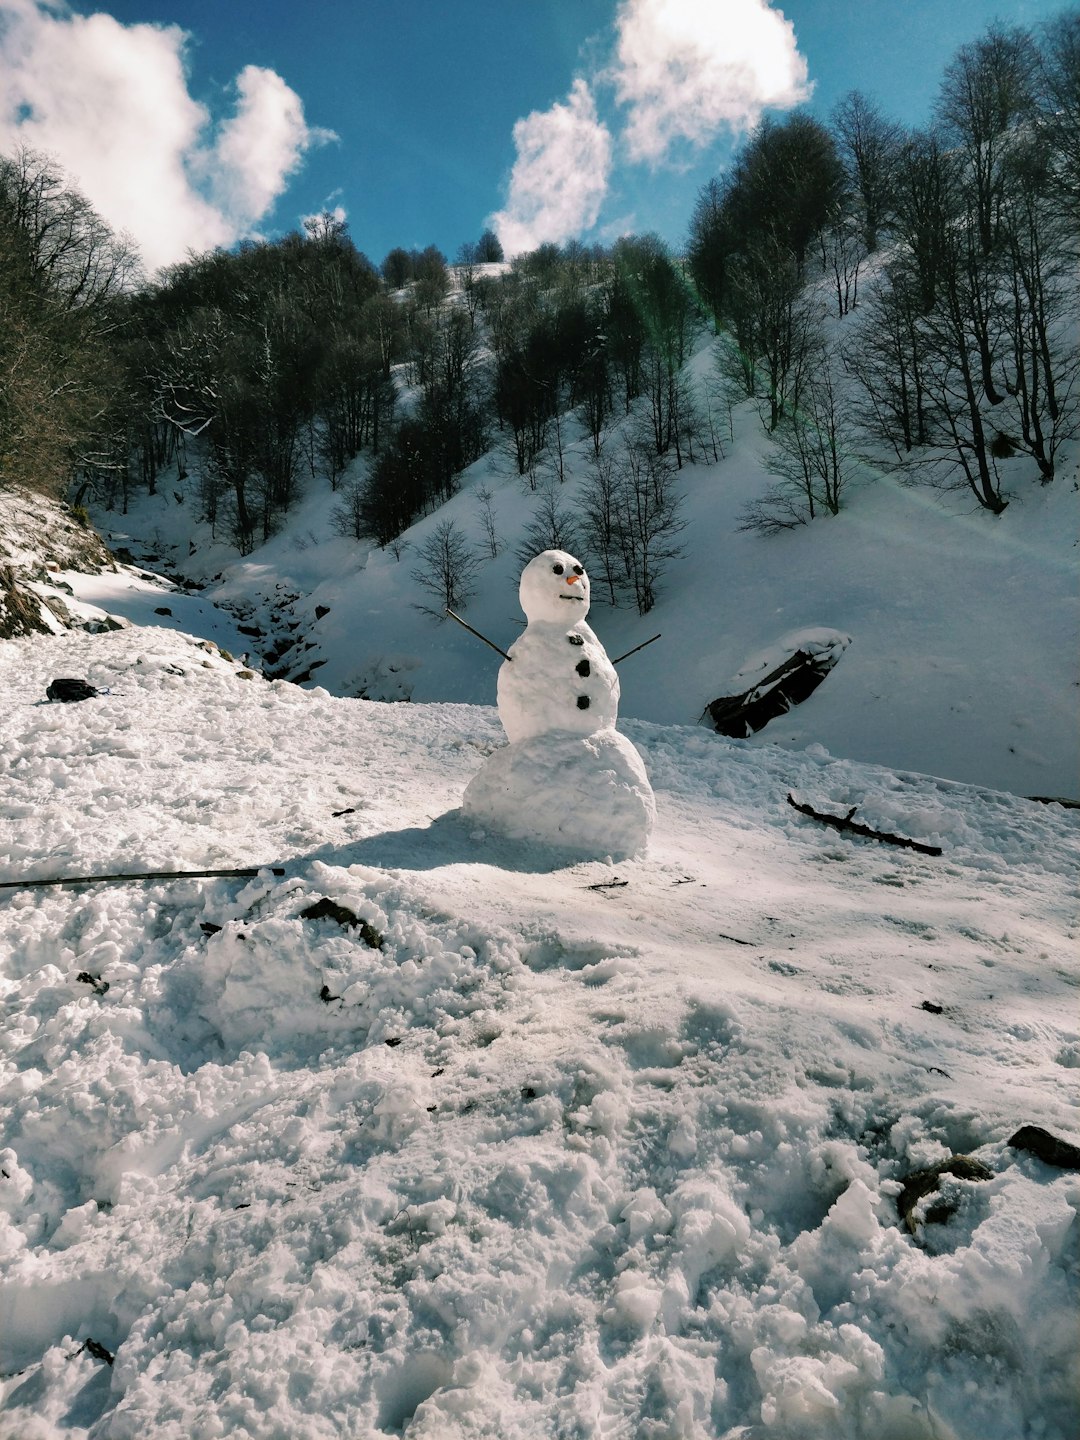 Compound Interest Calculator is like a snowman rolling down a hill.